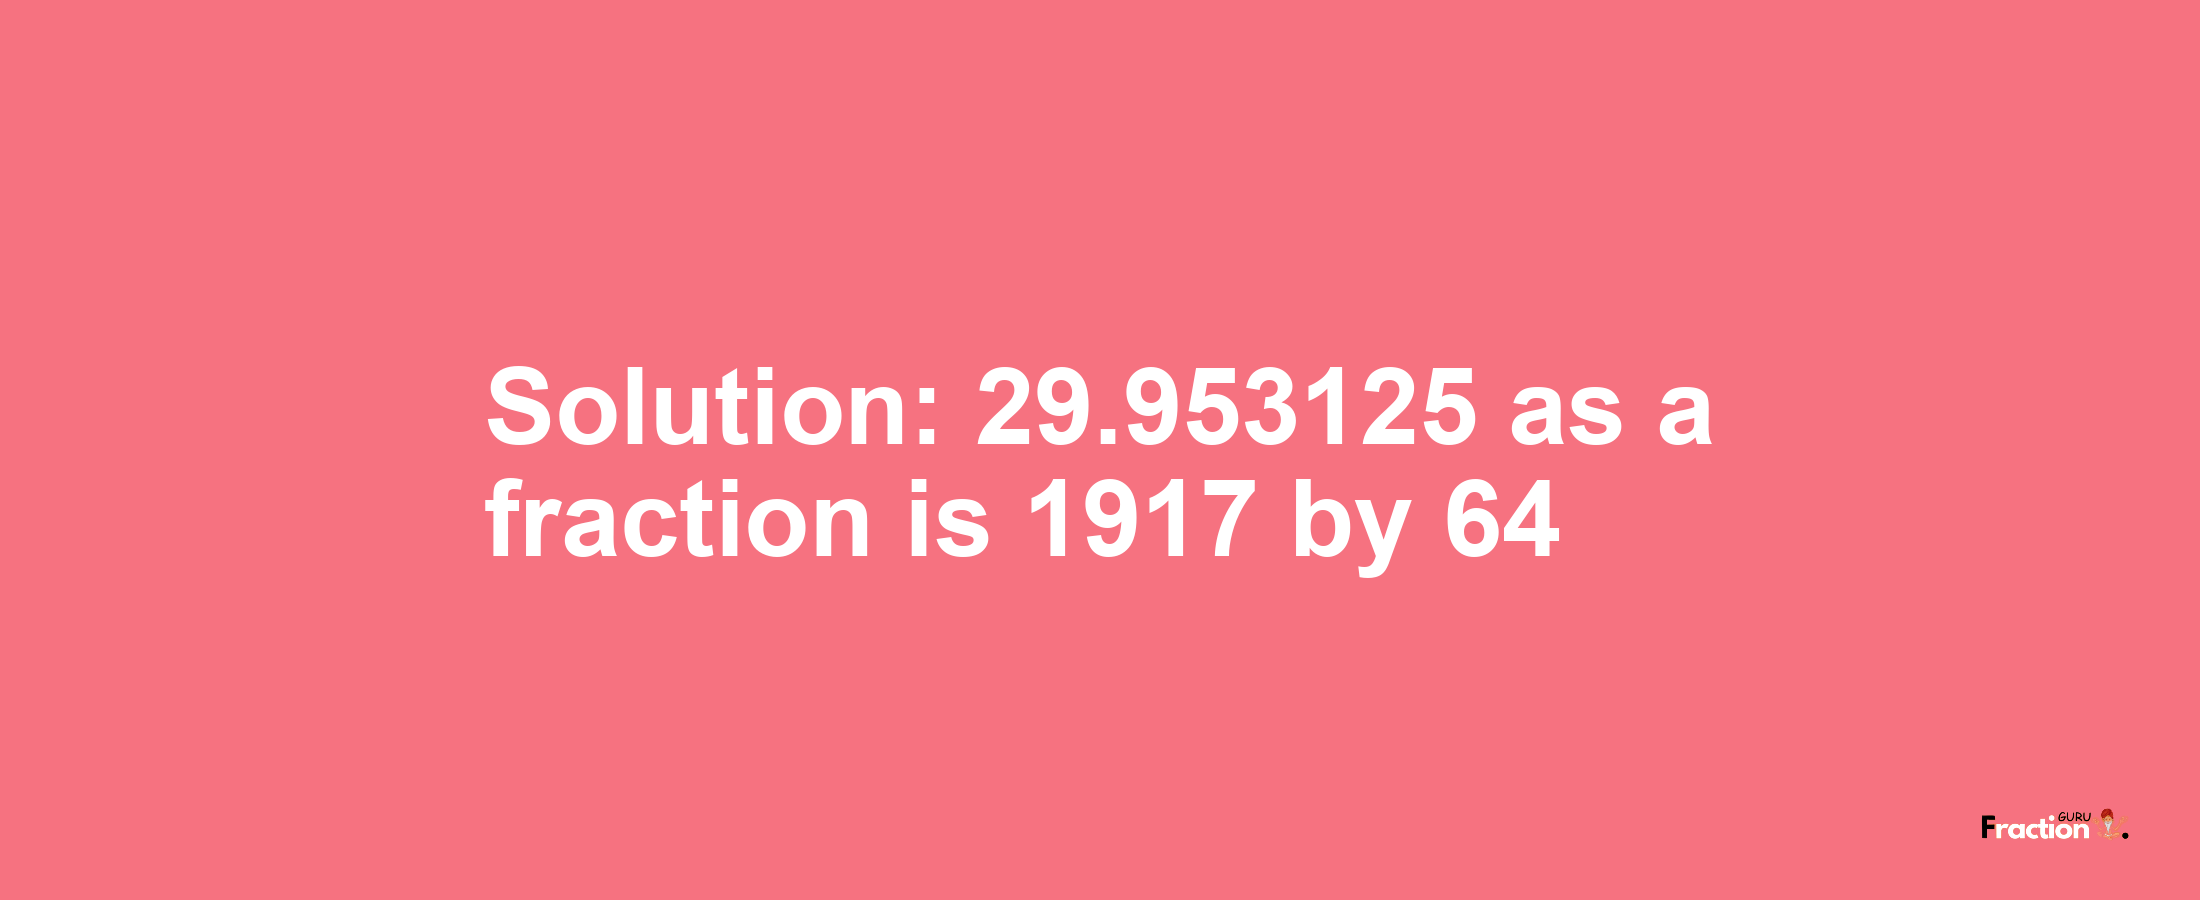 Solution:29.953125 as a fraction is 1917/64